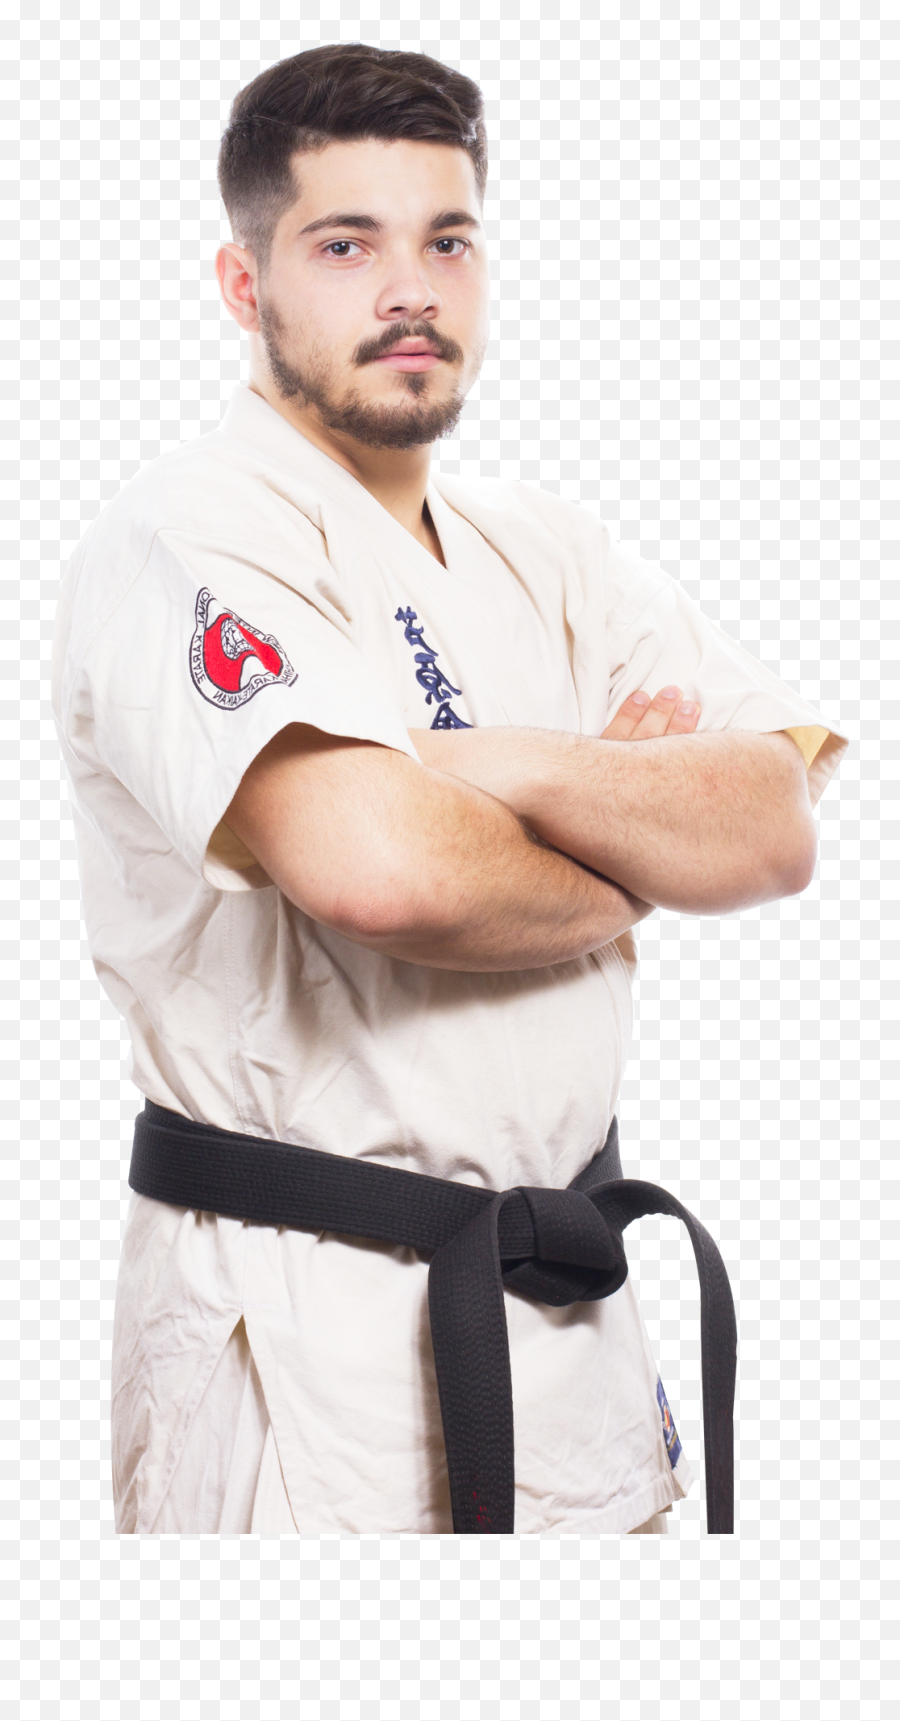 Karate Male Fighter Png Image